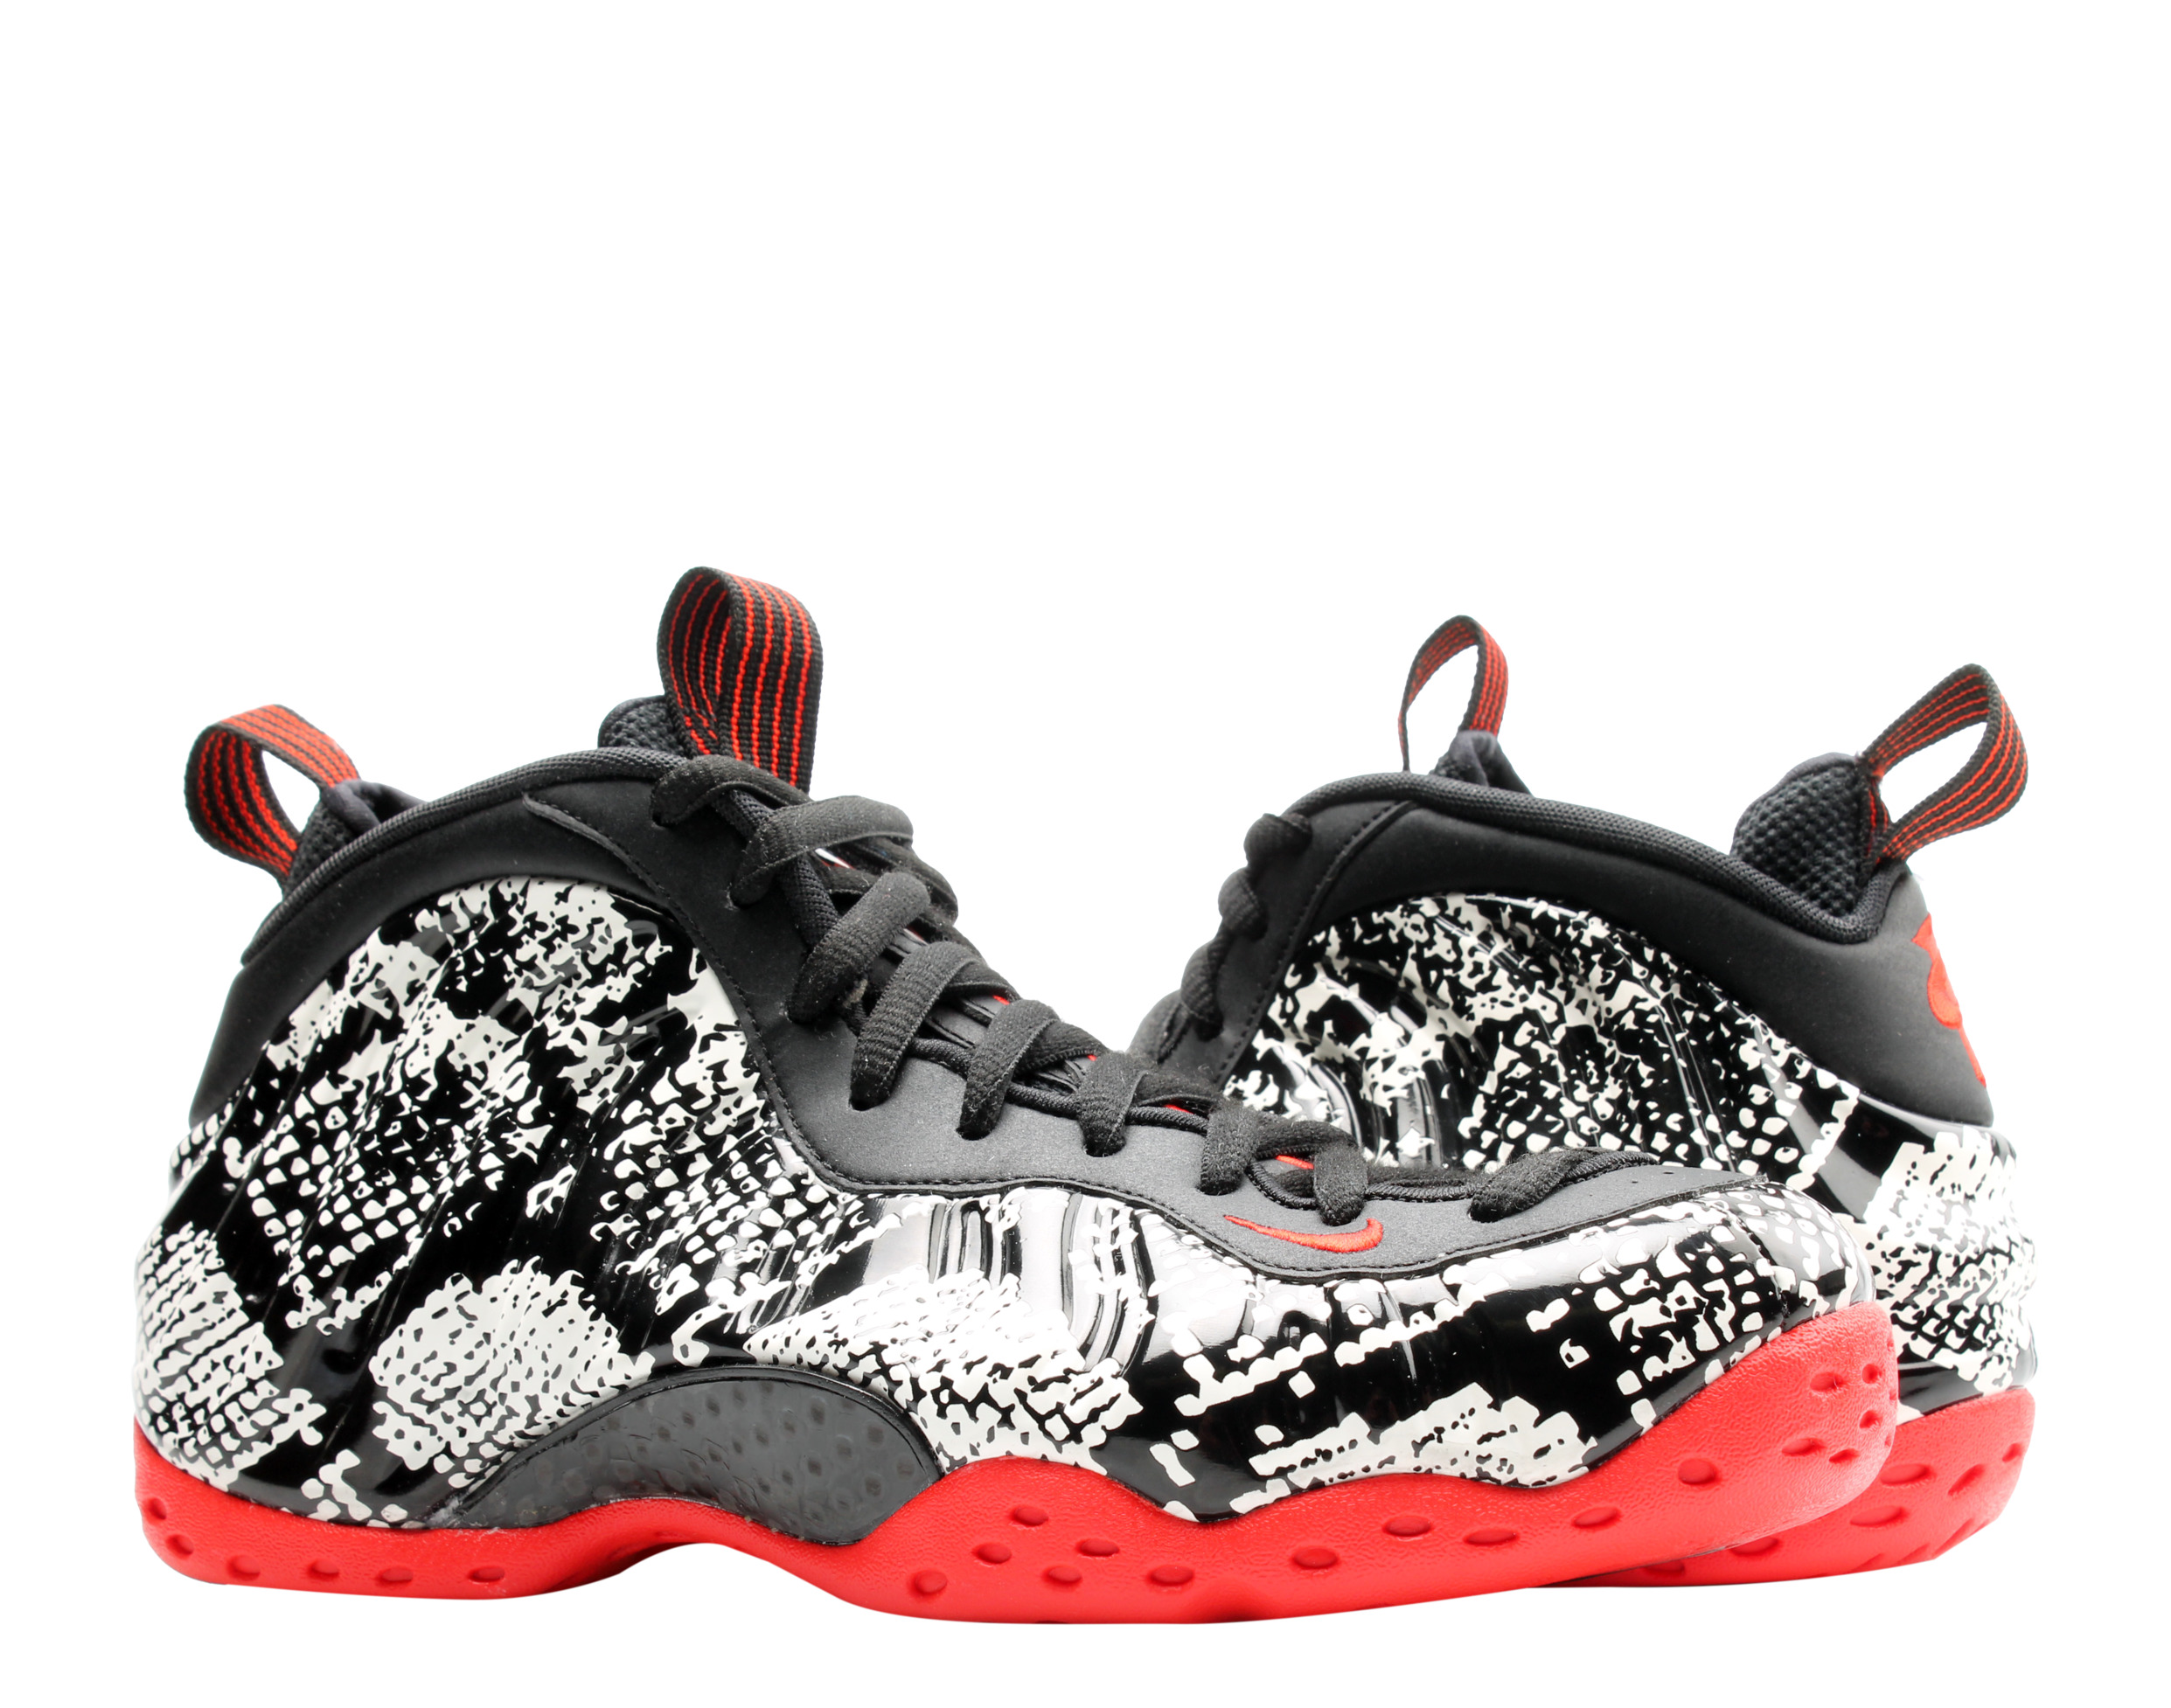 Nike Air Foamposite One Sail/Black-Red Snake Men's Basketball Shoes 314996-101 - image 1 of 6